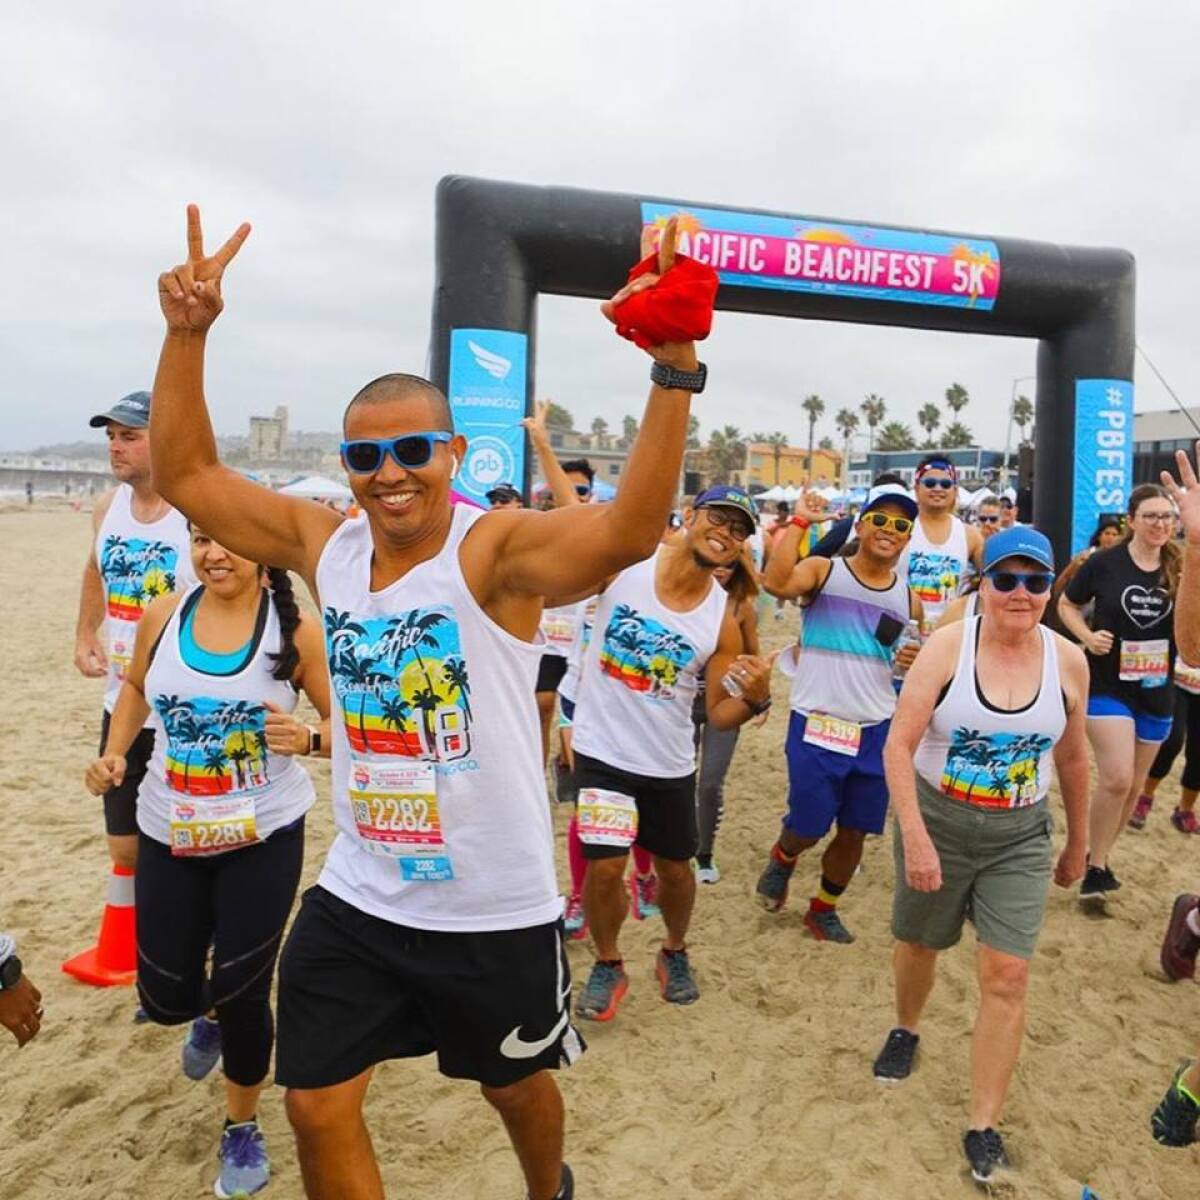 Pacific Beachfest 2019: 11 a.m. to 7 p.m. Saturday, Oct. 5, along the boardwalk from Felspar to Thomas streets. Brought to you by Discover PB, the festival includes a 5K and Kids 1K, volleyball tournaments, music, fish taco contest, beer garden, kids activities and shopping. Free. Register for 8:30 a.m. 5K (hosted by the San Diego Running Company) at sandiegorunningco.com $45 entry fee includes official tank top, sunglasses, one complimentary beer in the PB Craft Beer Garden and finishers medal. Kids 1K costs $20. pacificbeachfest.org